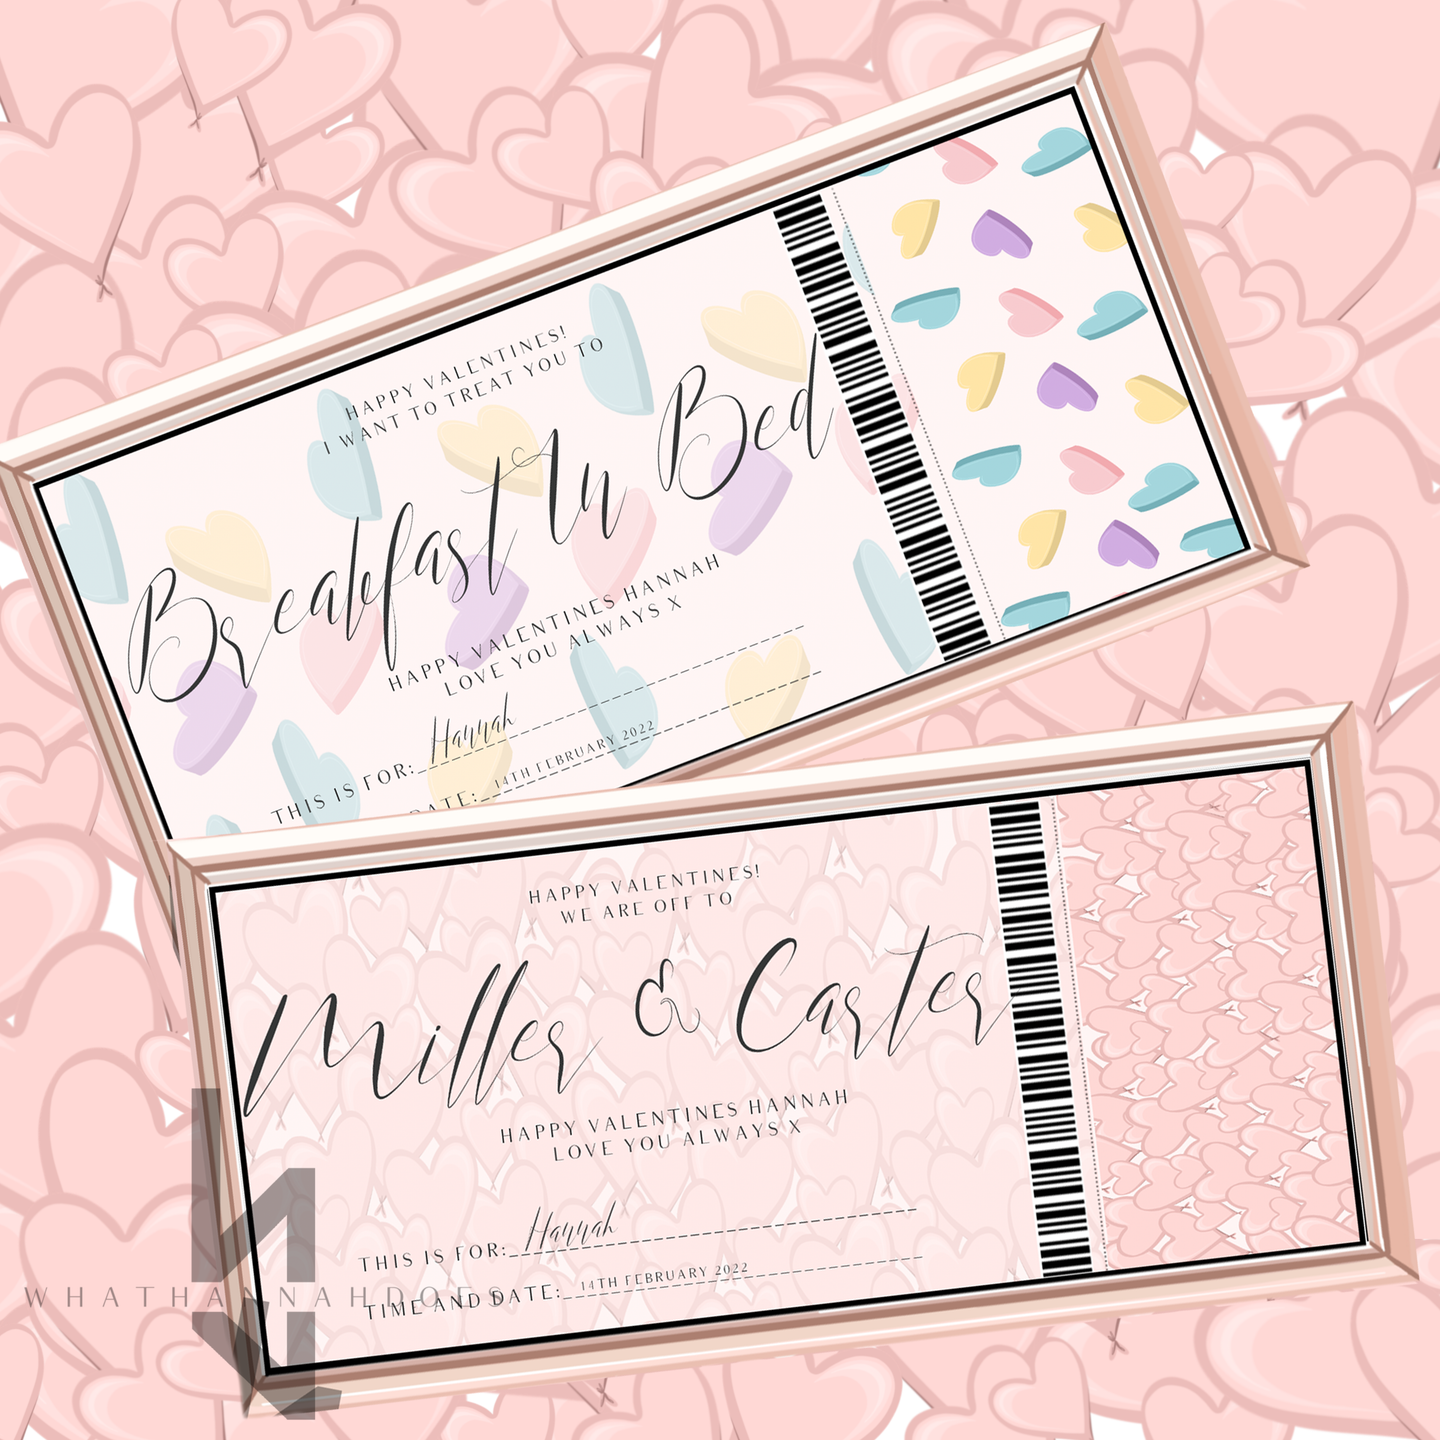 Hearts Background Event Ticket Design for Gift Giving Voucher